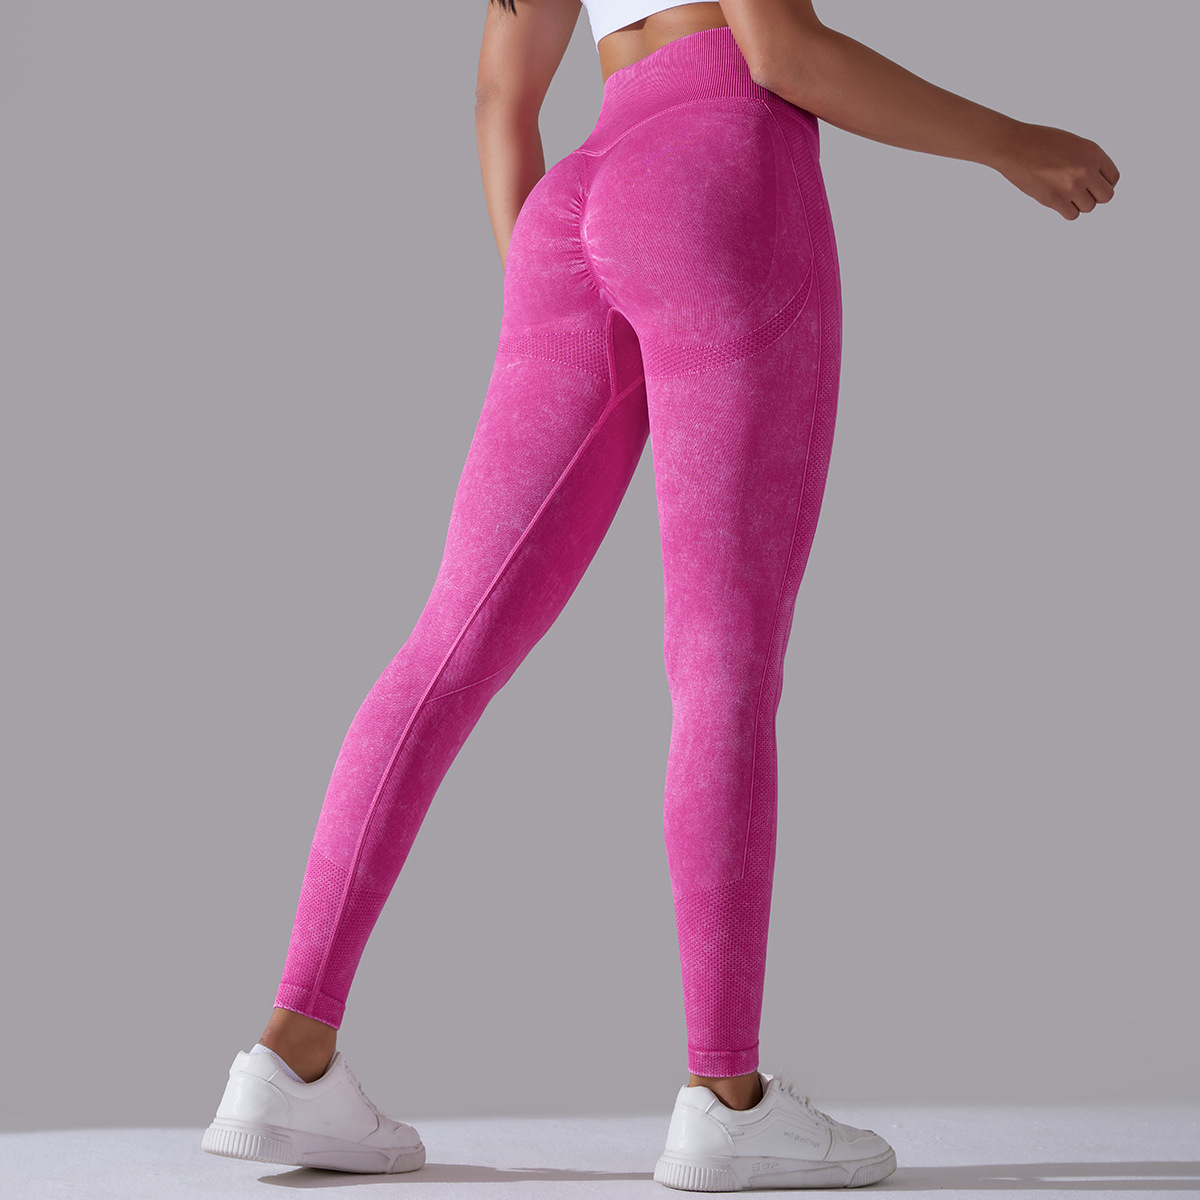 gym pants supplier